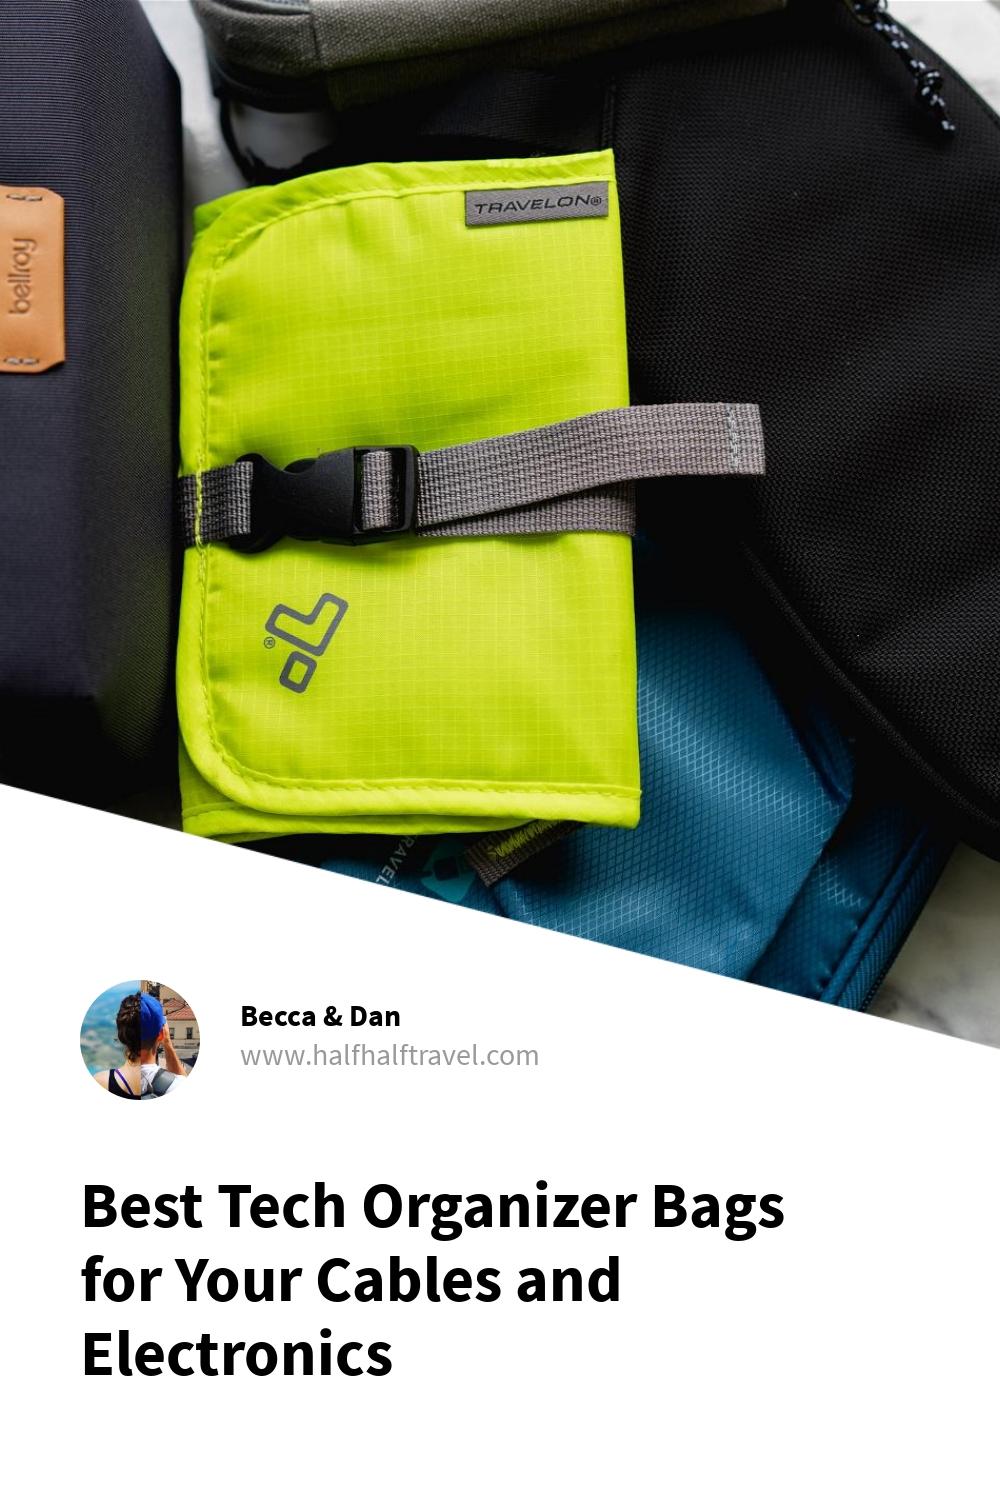 Pinterest image from the 'Best tech organizer bags for your cables and electronics' article on Half Half Travel